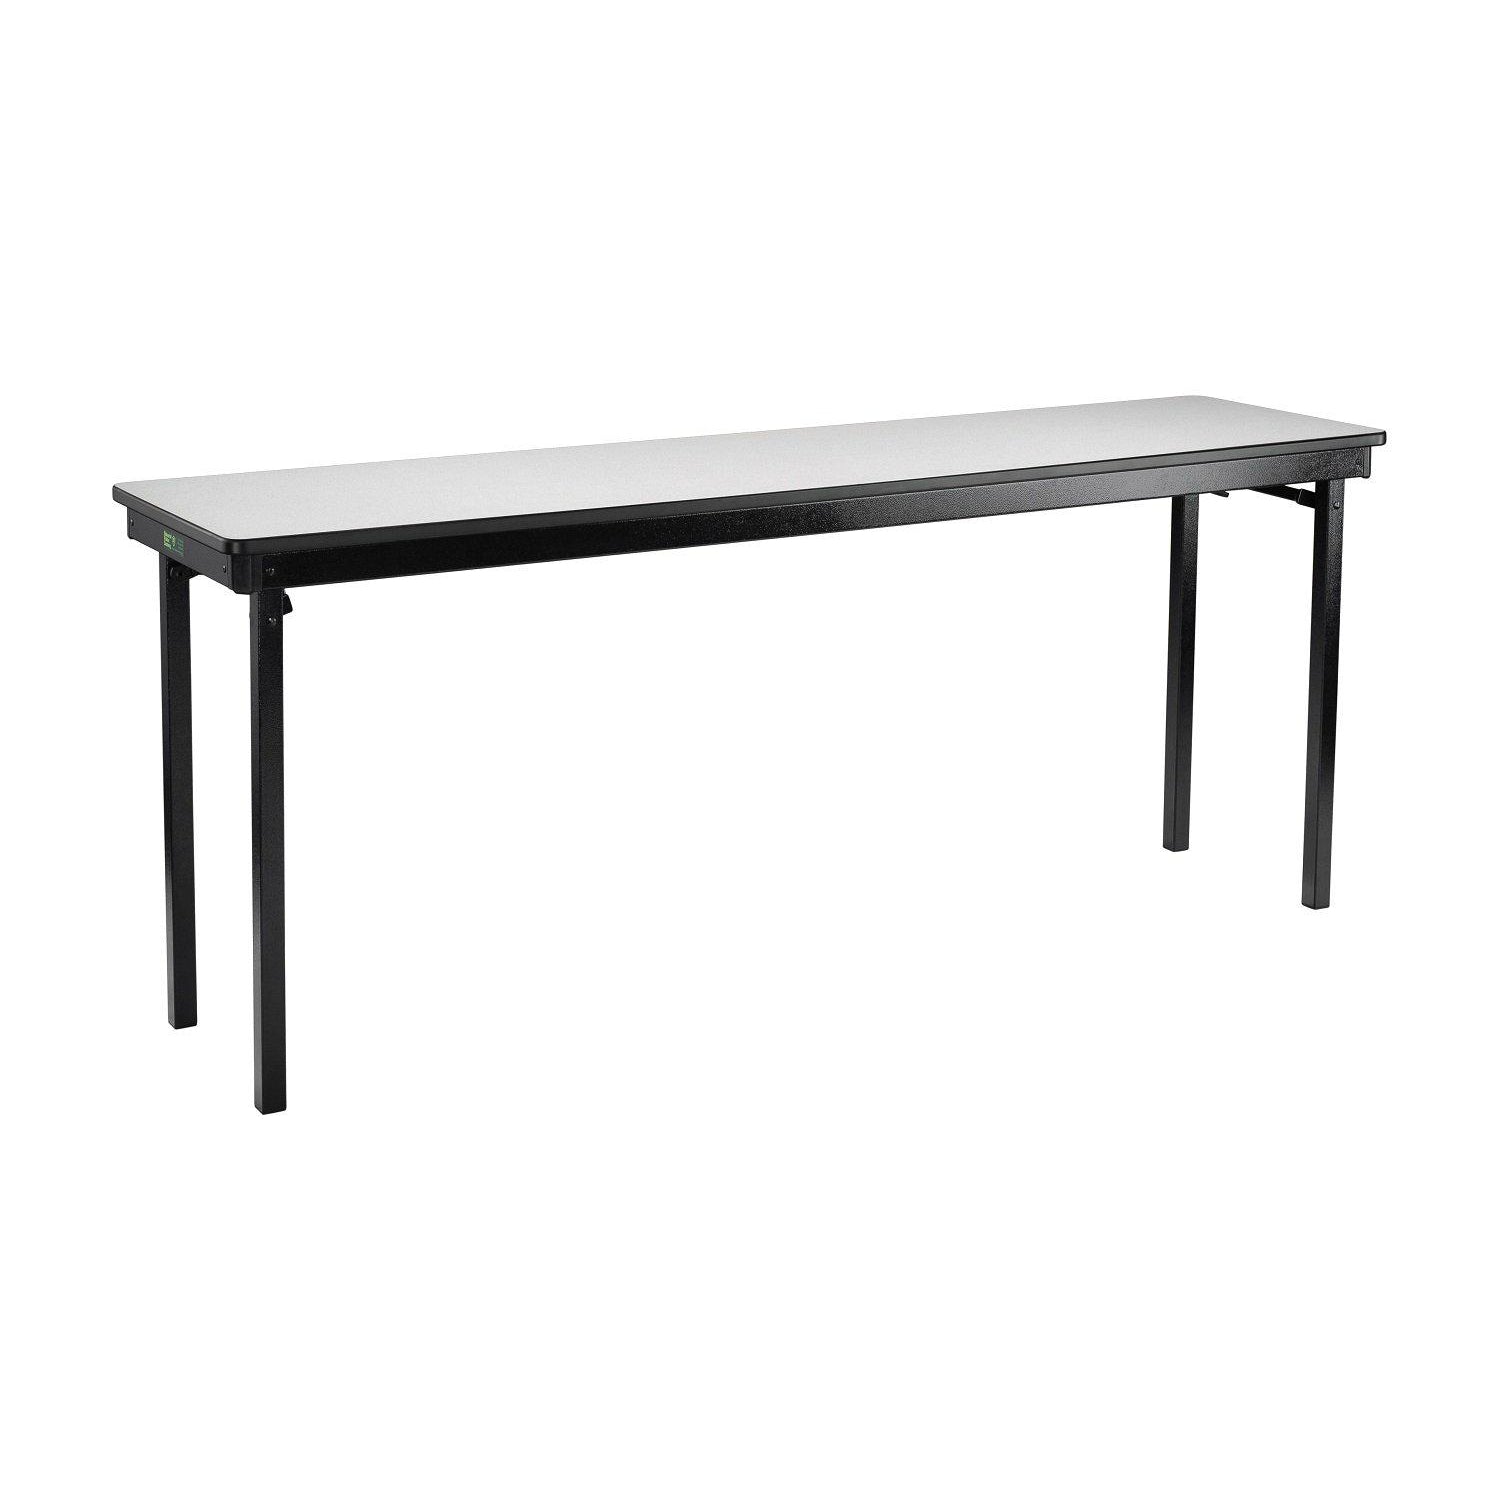 Max Seating Folding Table, 18" x 72", Premium Plywood Core, High Pressure Laminate Top with PVC Edge Banding